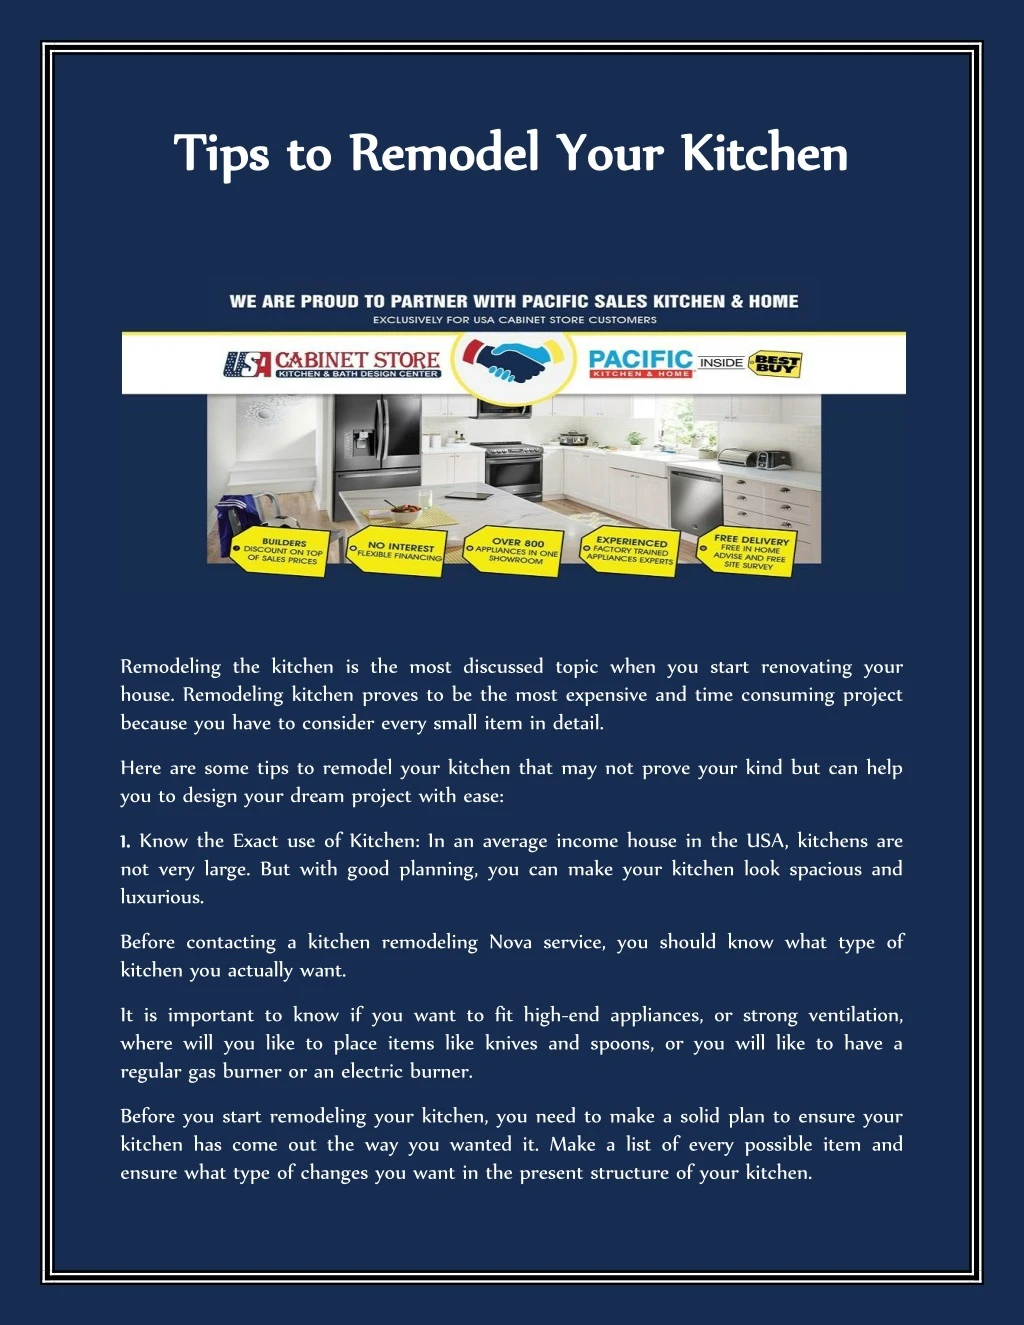 tips to remodel your kitchen tips to remodel your